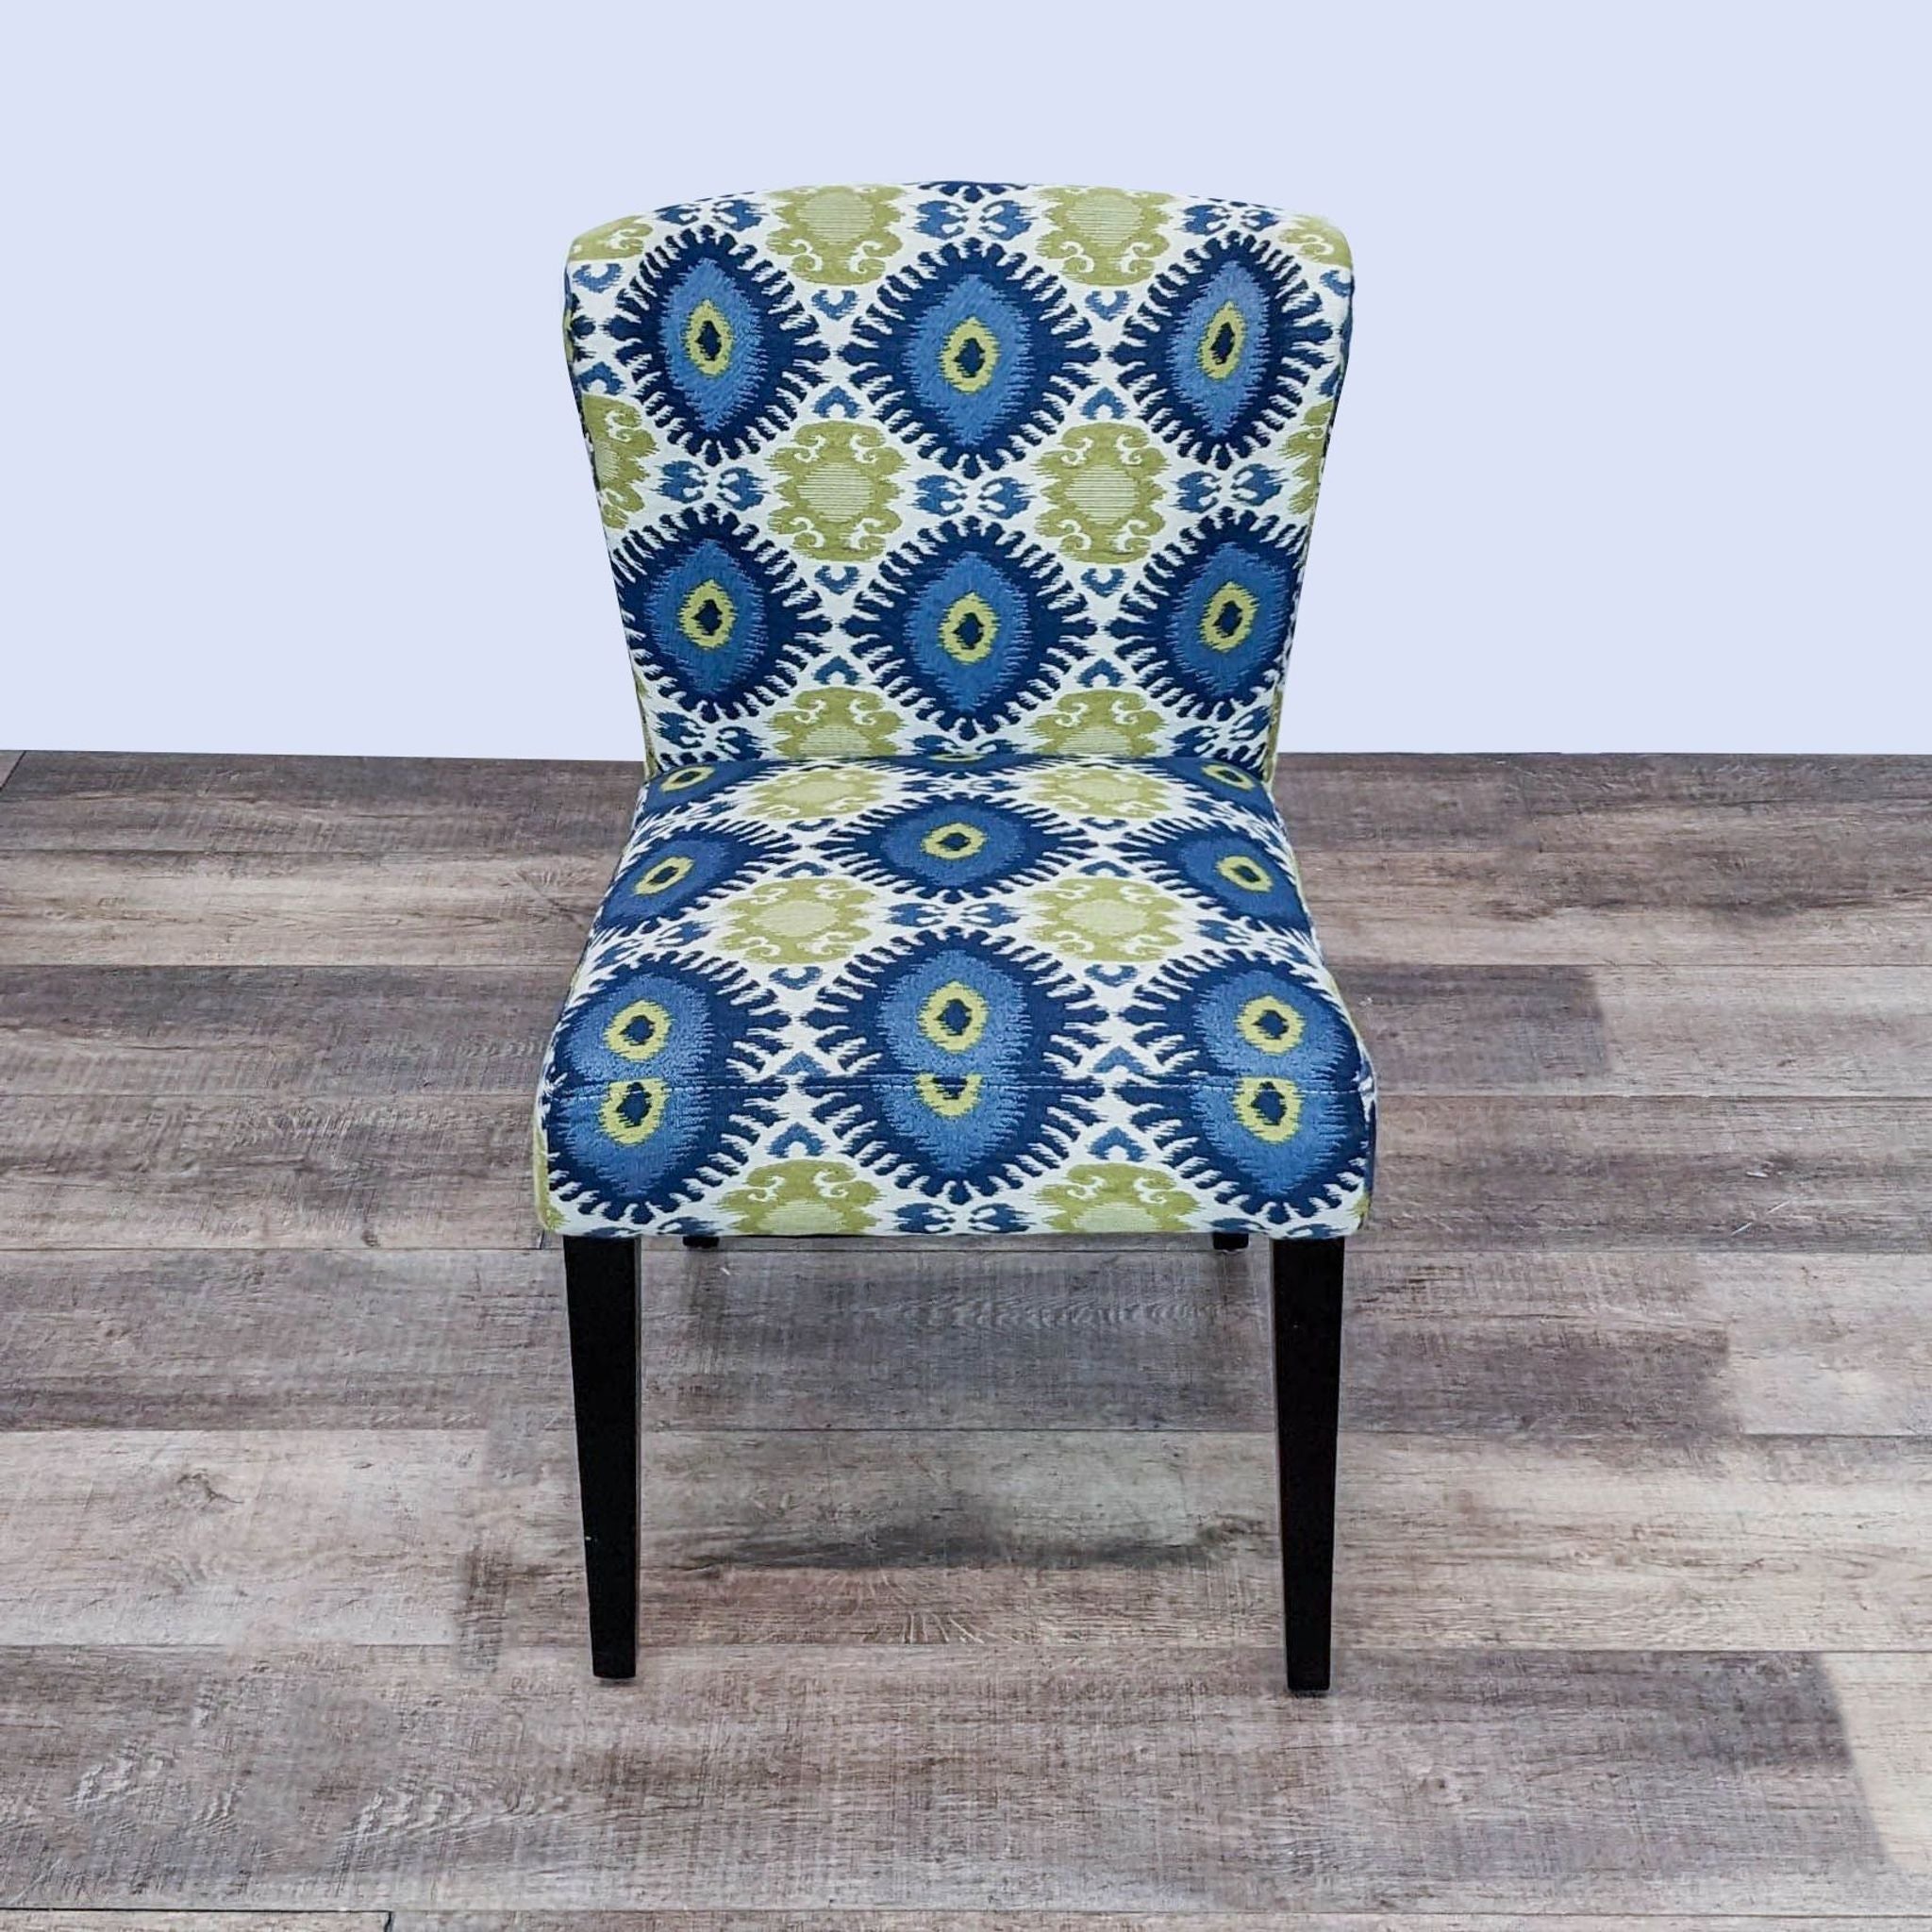 Cost Plus transitional dining chair with Ikat fabric and tapered legs, viewed frontally.